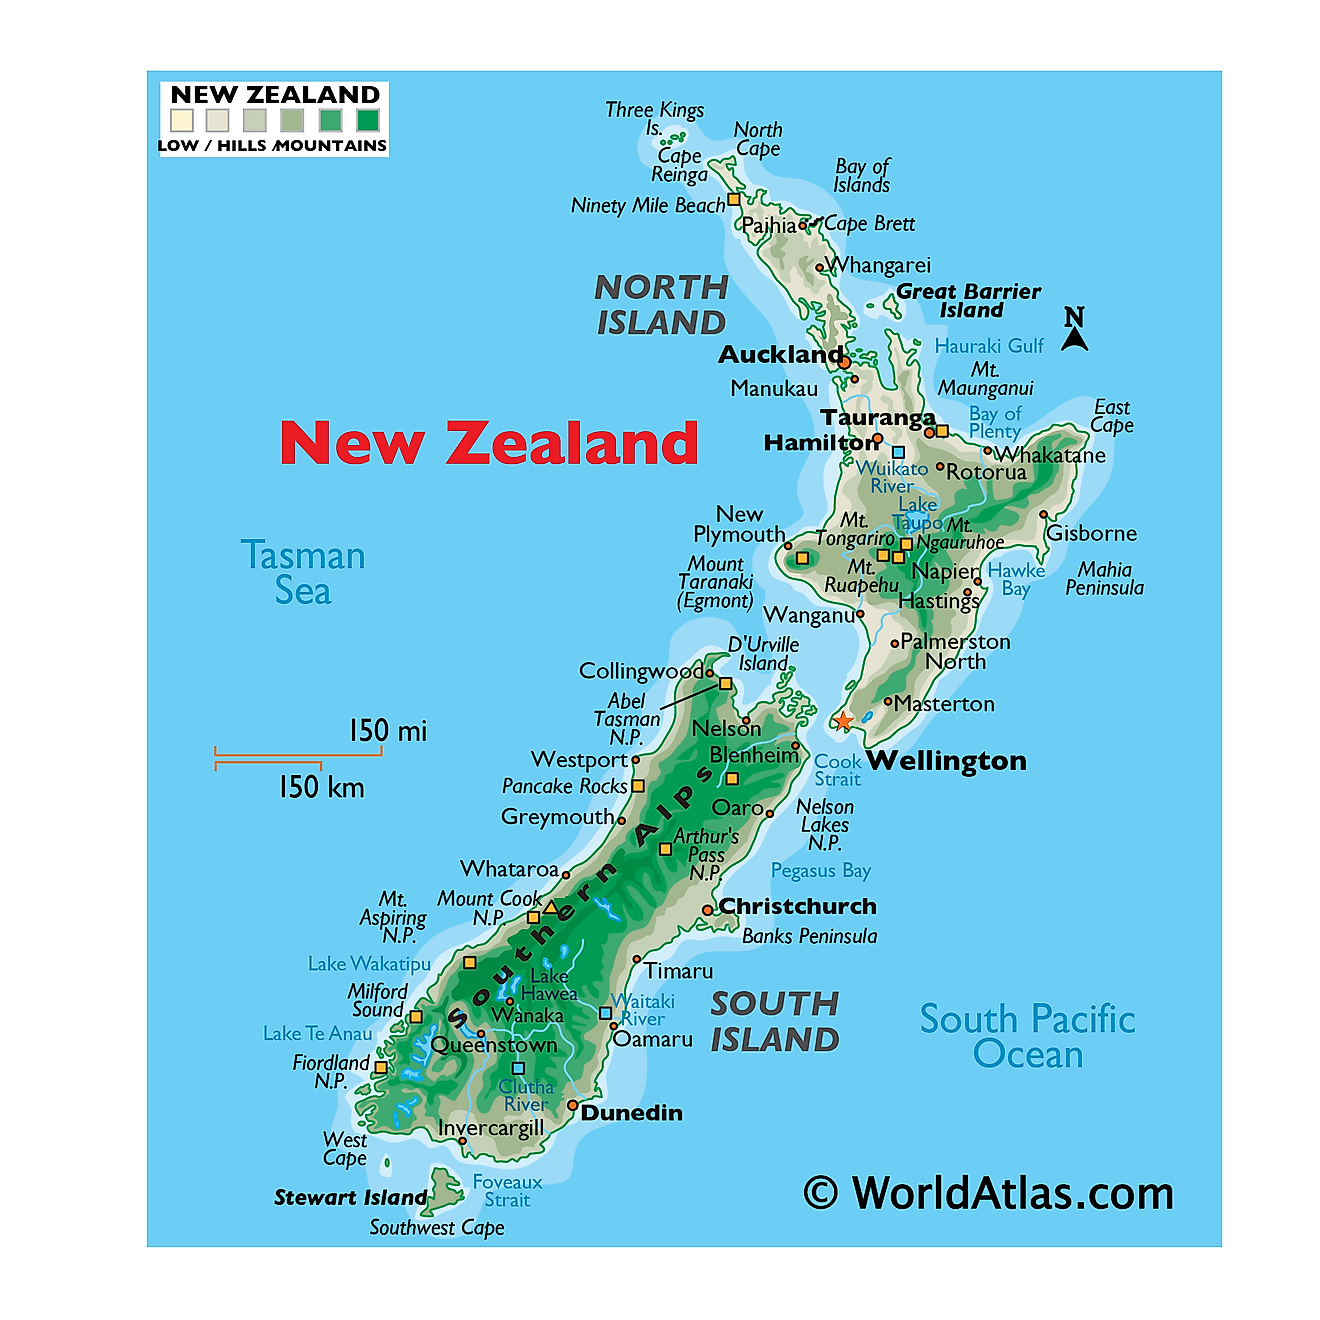 Physical Map of New Zealand showing relief, mountains, major islands, capes, national parks, rivers, important cities, and more.